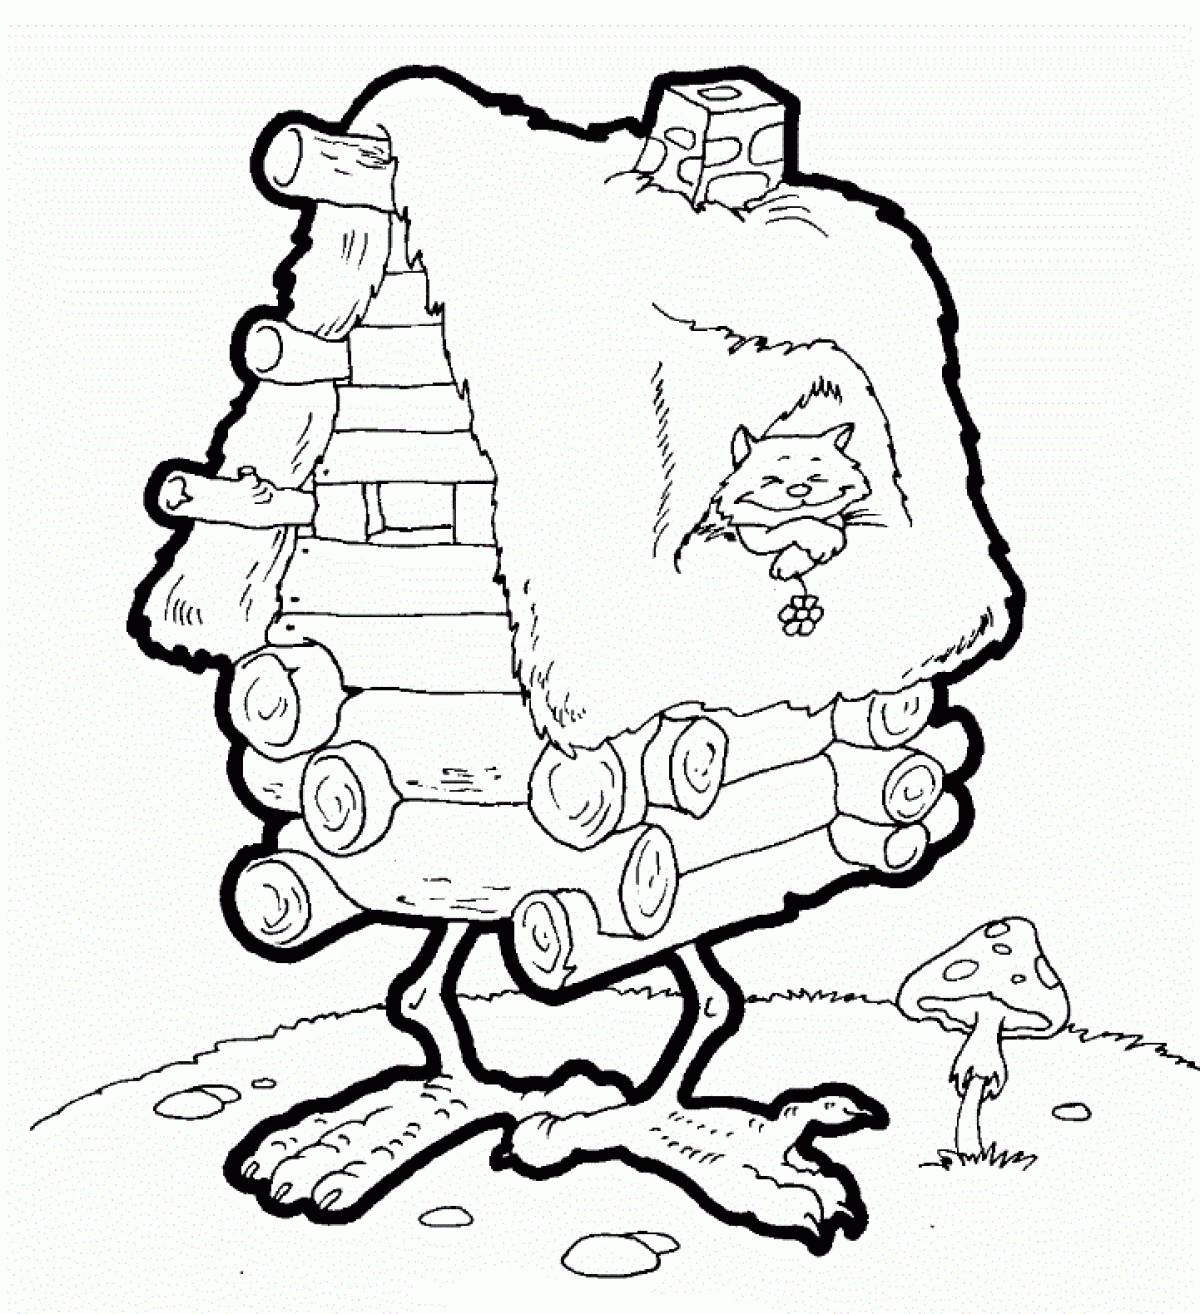 Coloring page hut on chicken legs